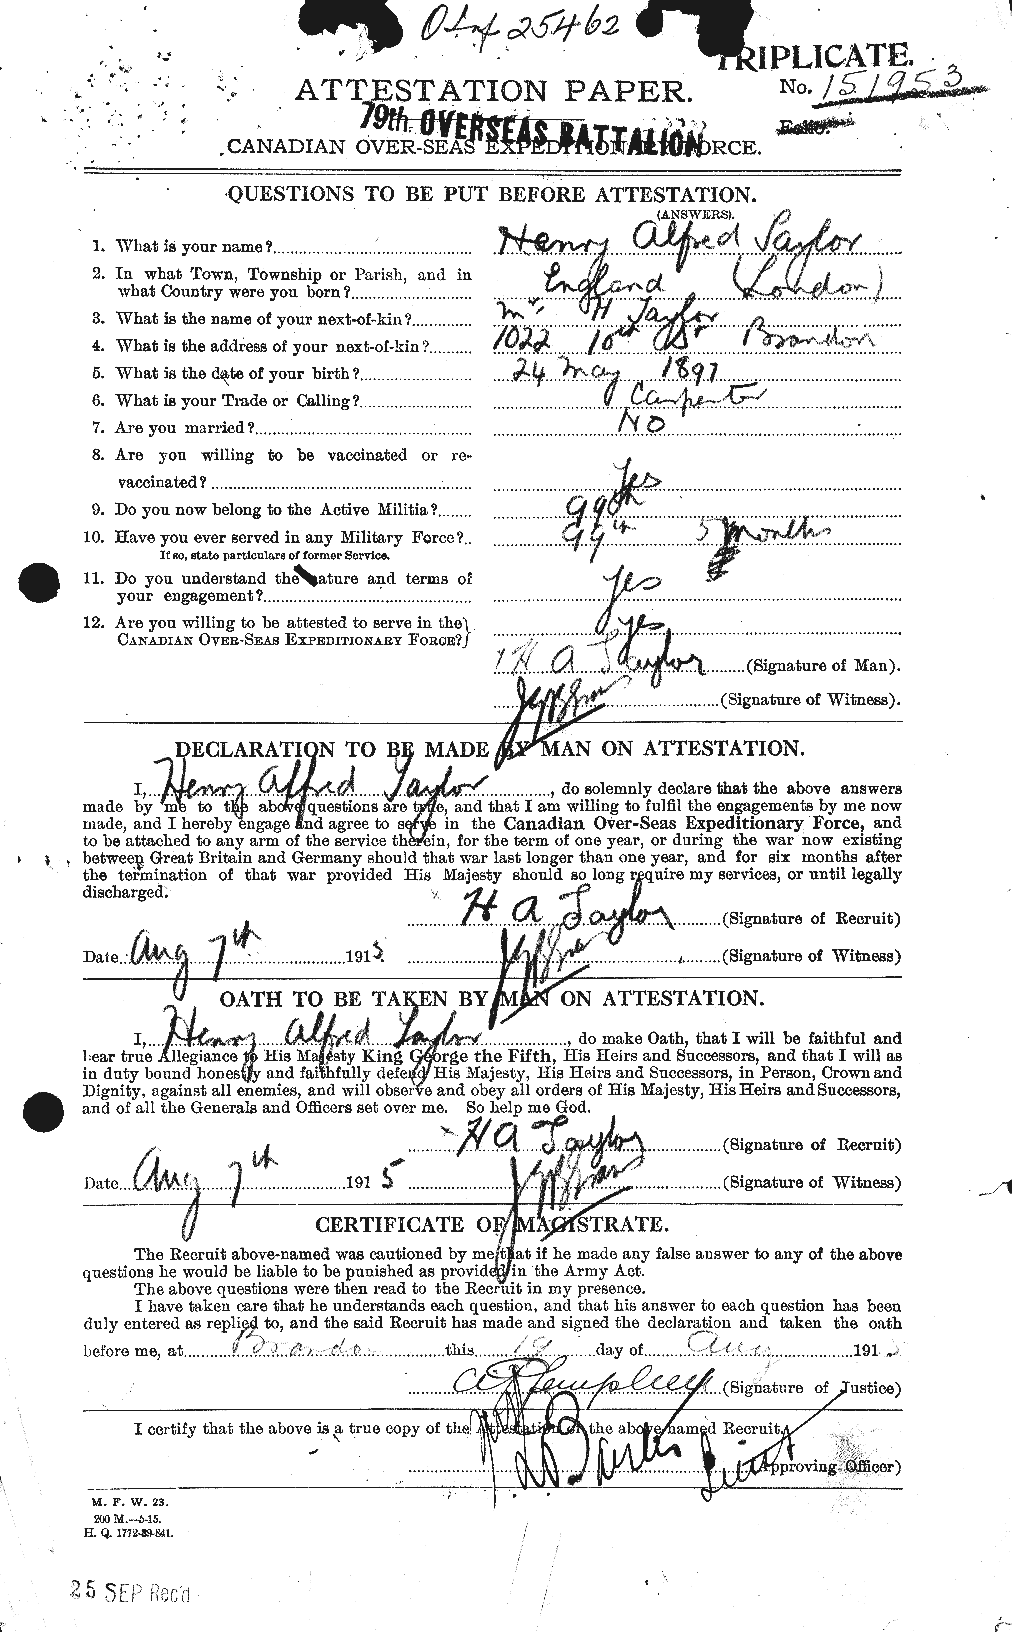 Personnel Records of the First World War - CEF 626528a